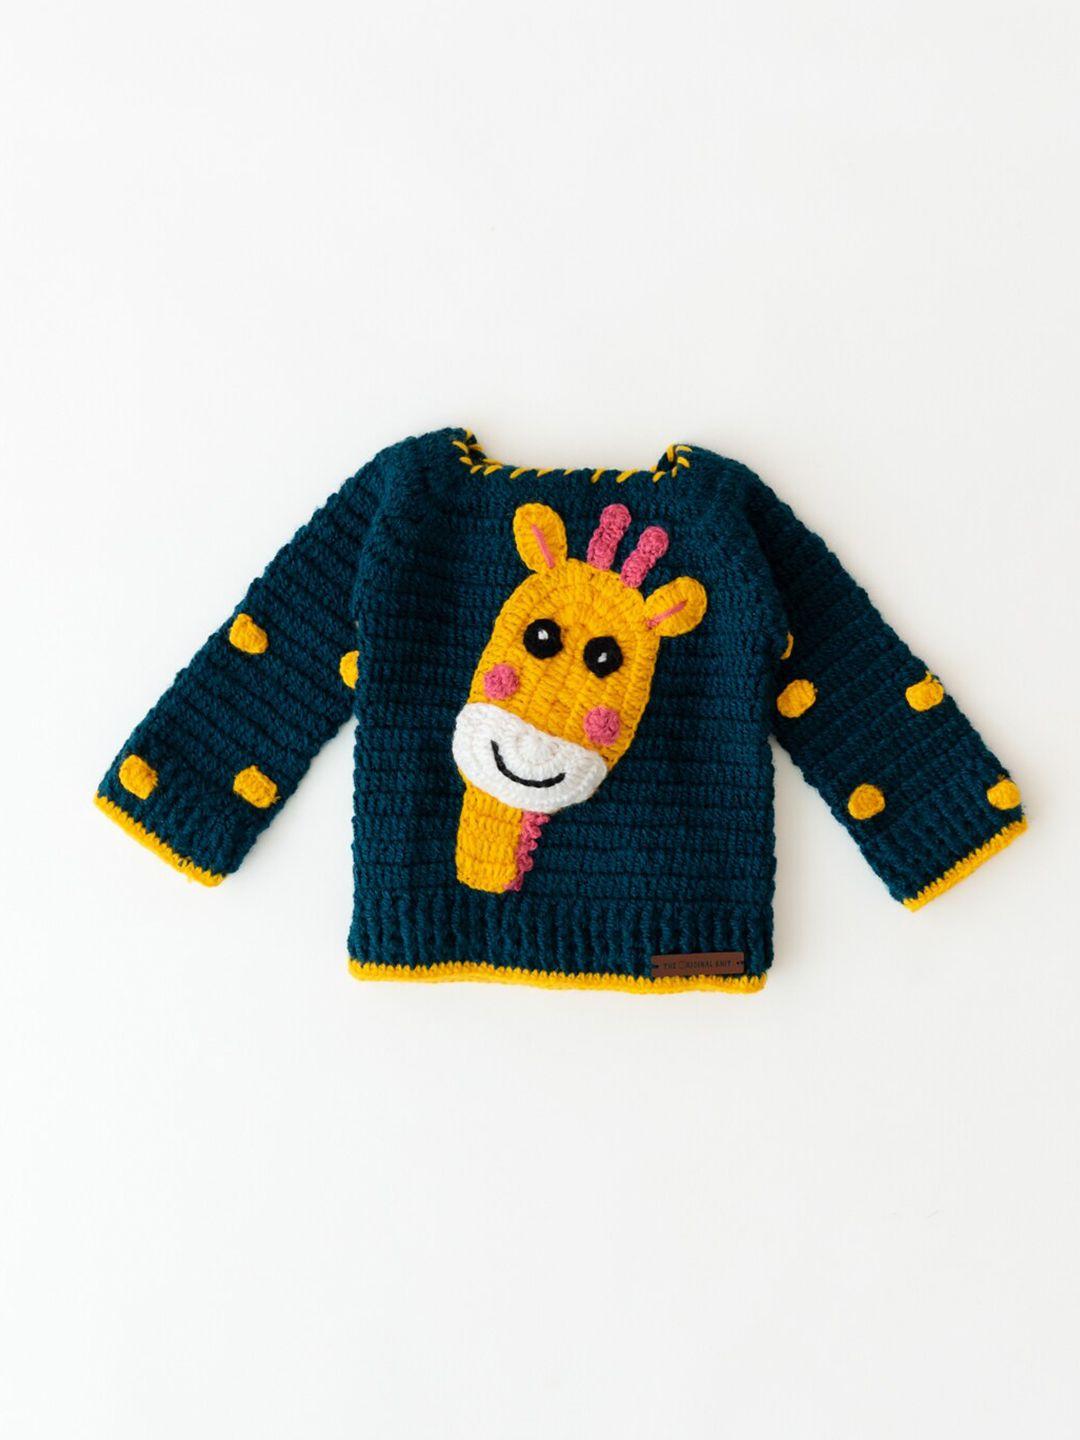 the original knit unisex kids navy blue & yellow cable knit pullover